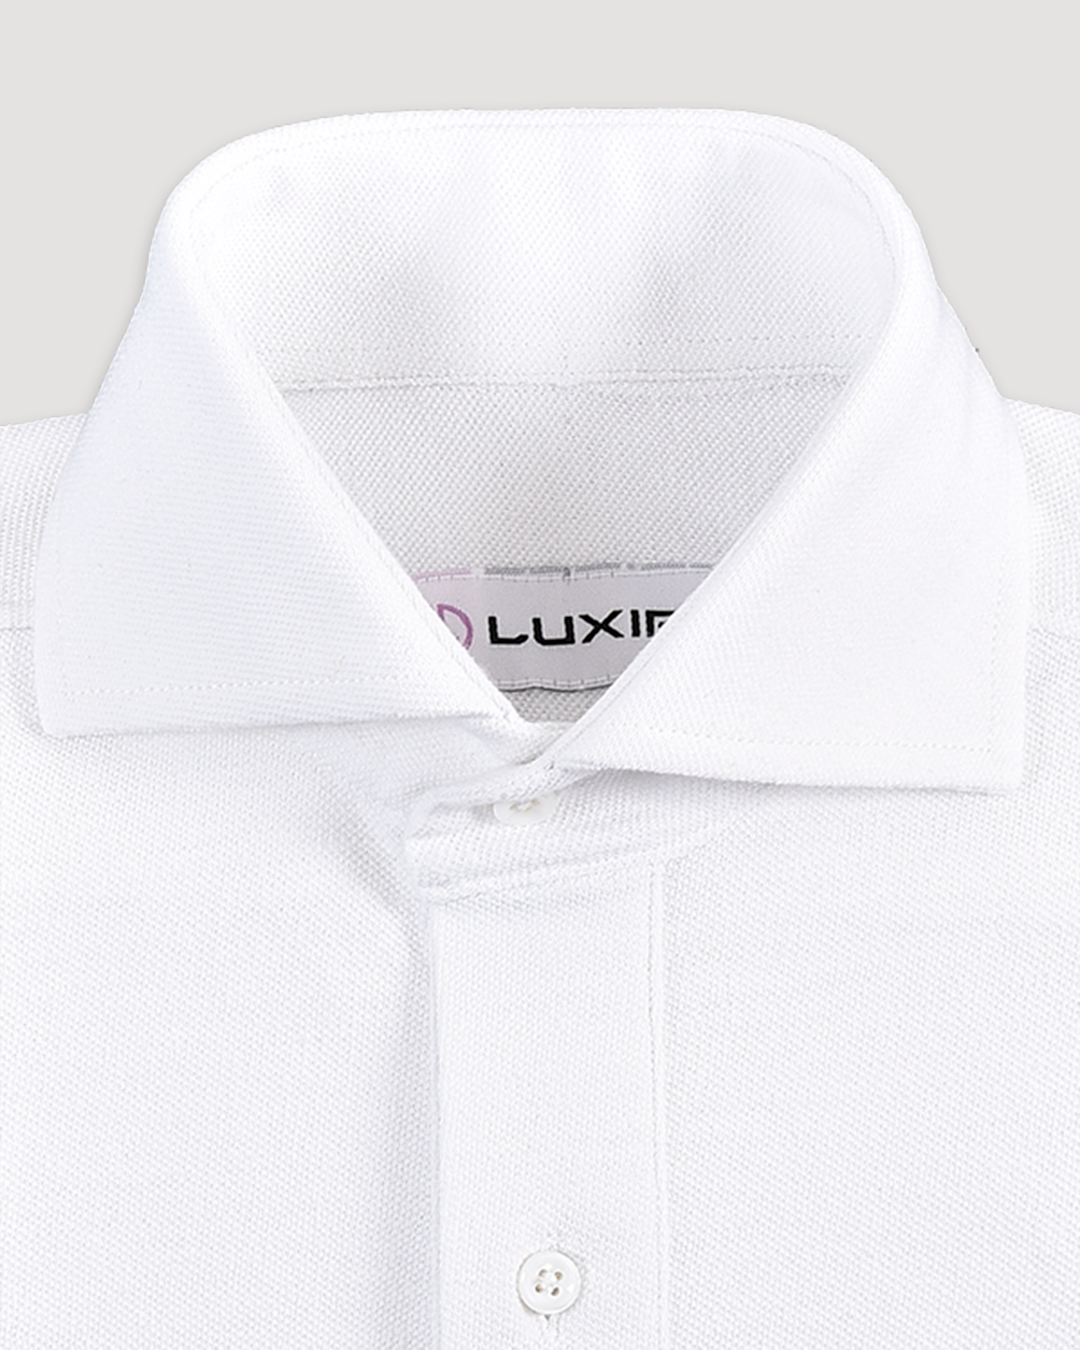 Collar of the custom oxford polo shirt for men by Luxire in pure white